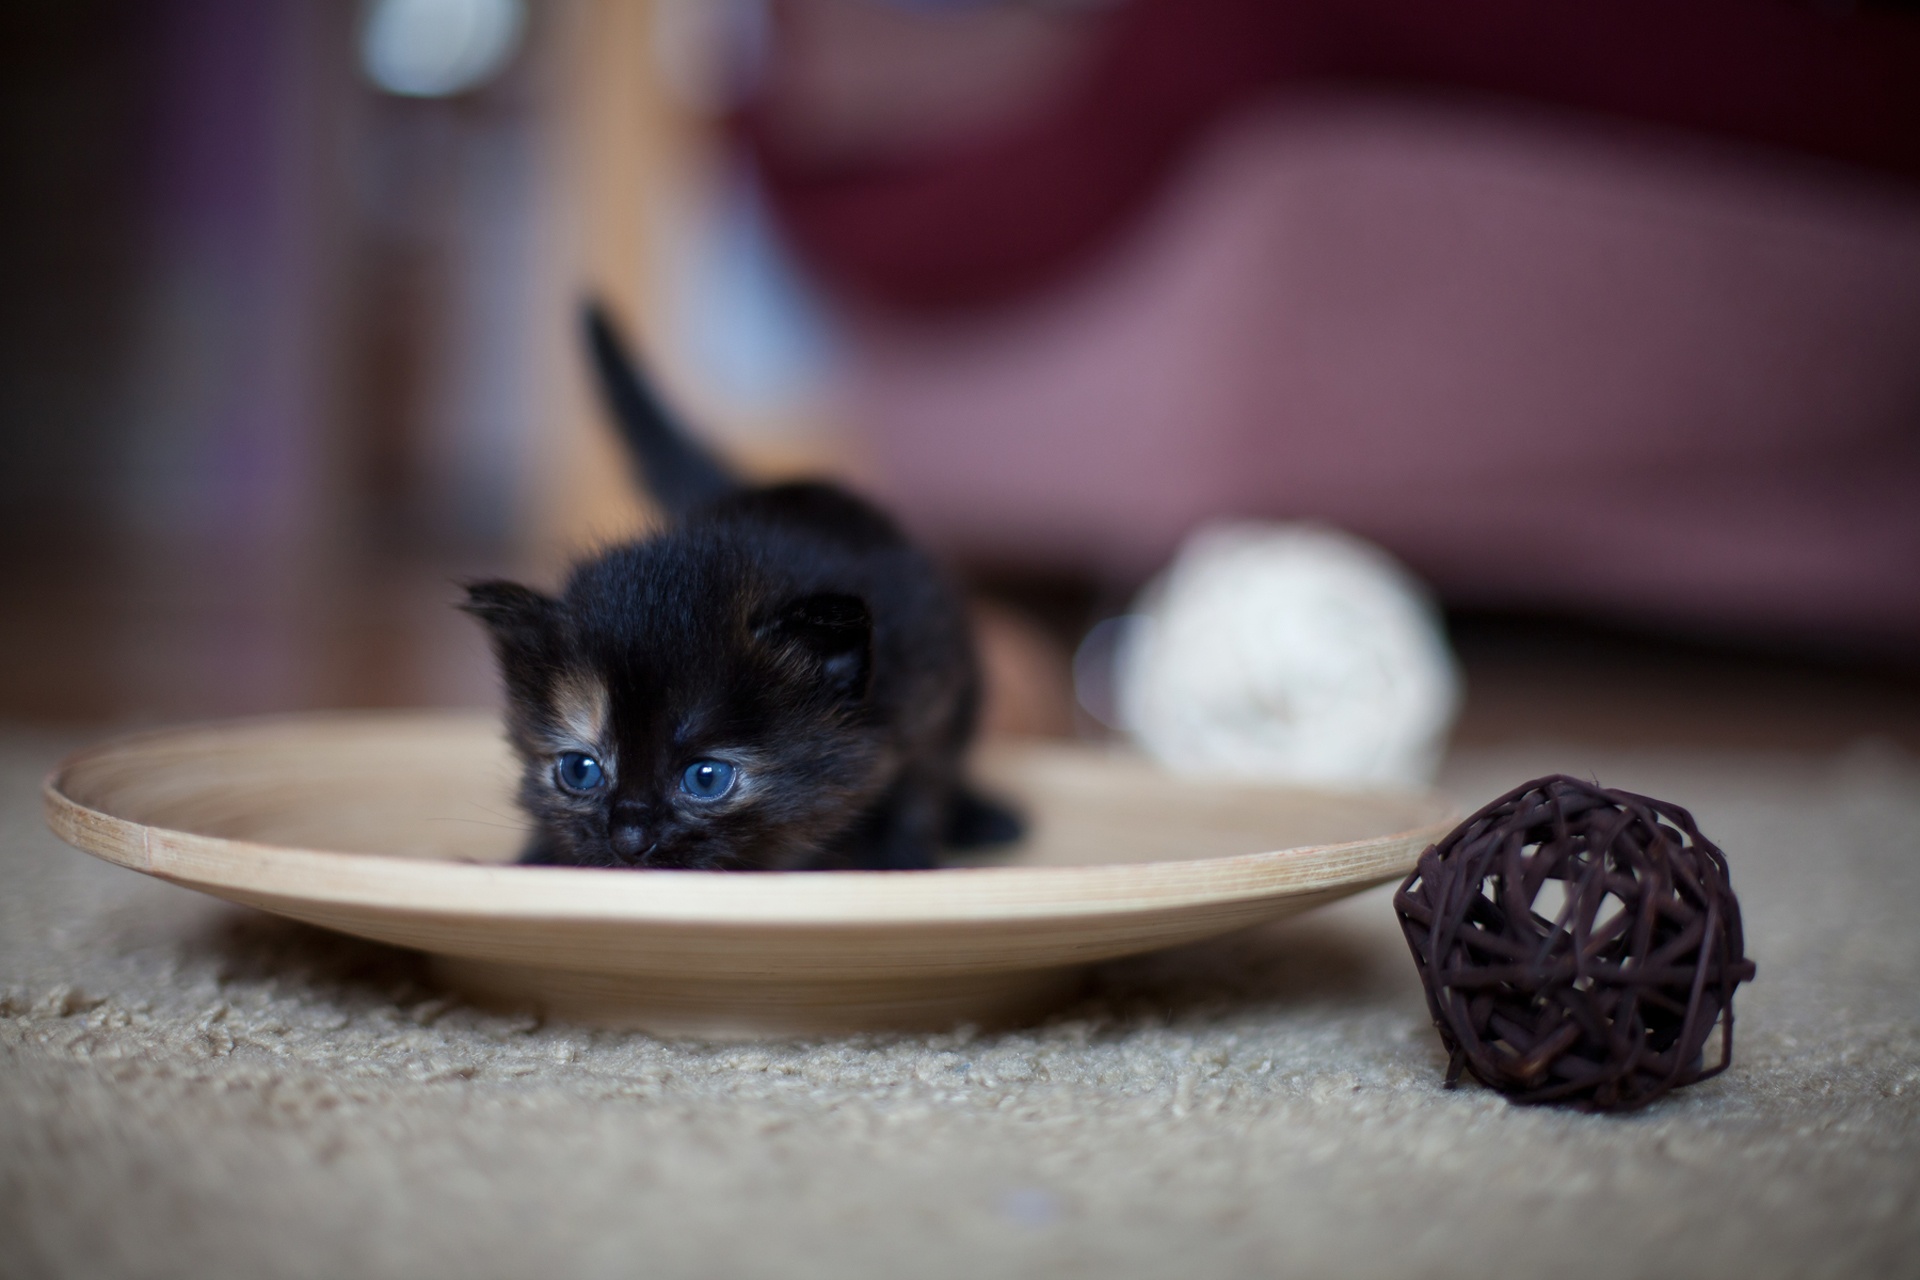 Caturday pic of a kitten sitting on a plate